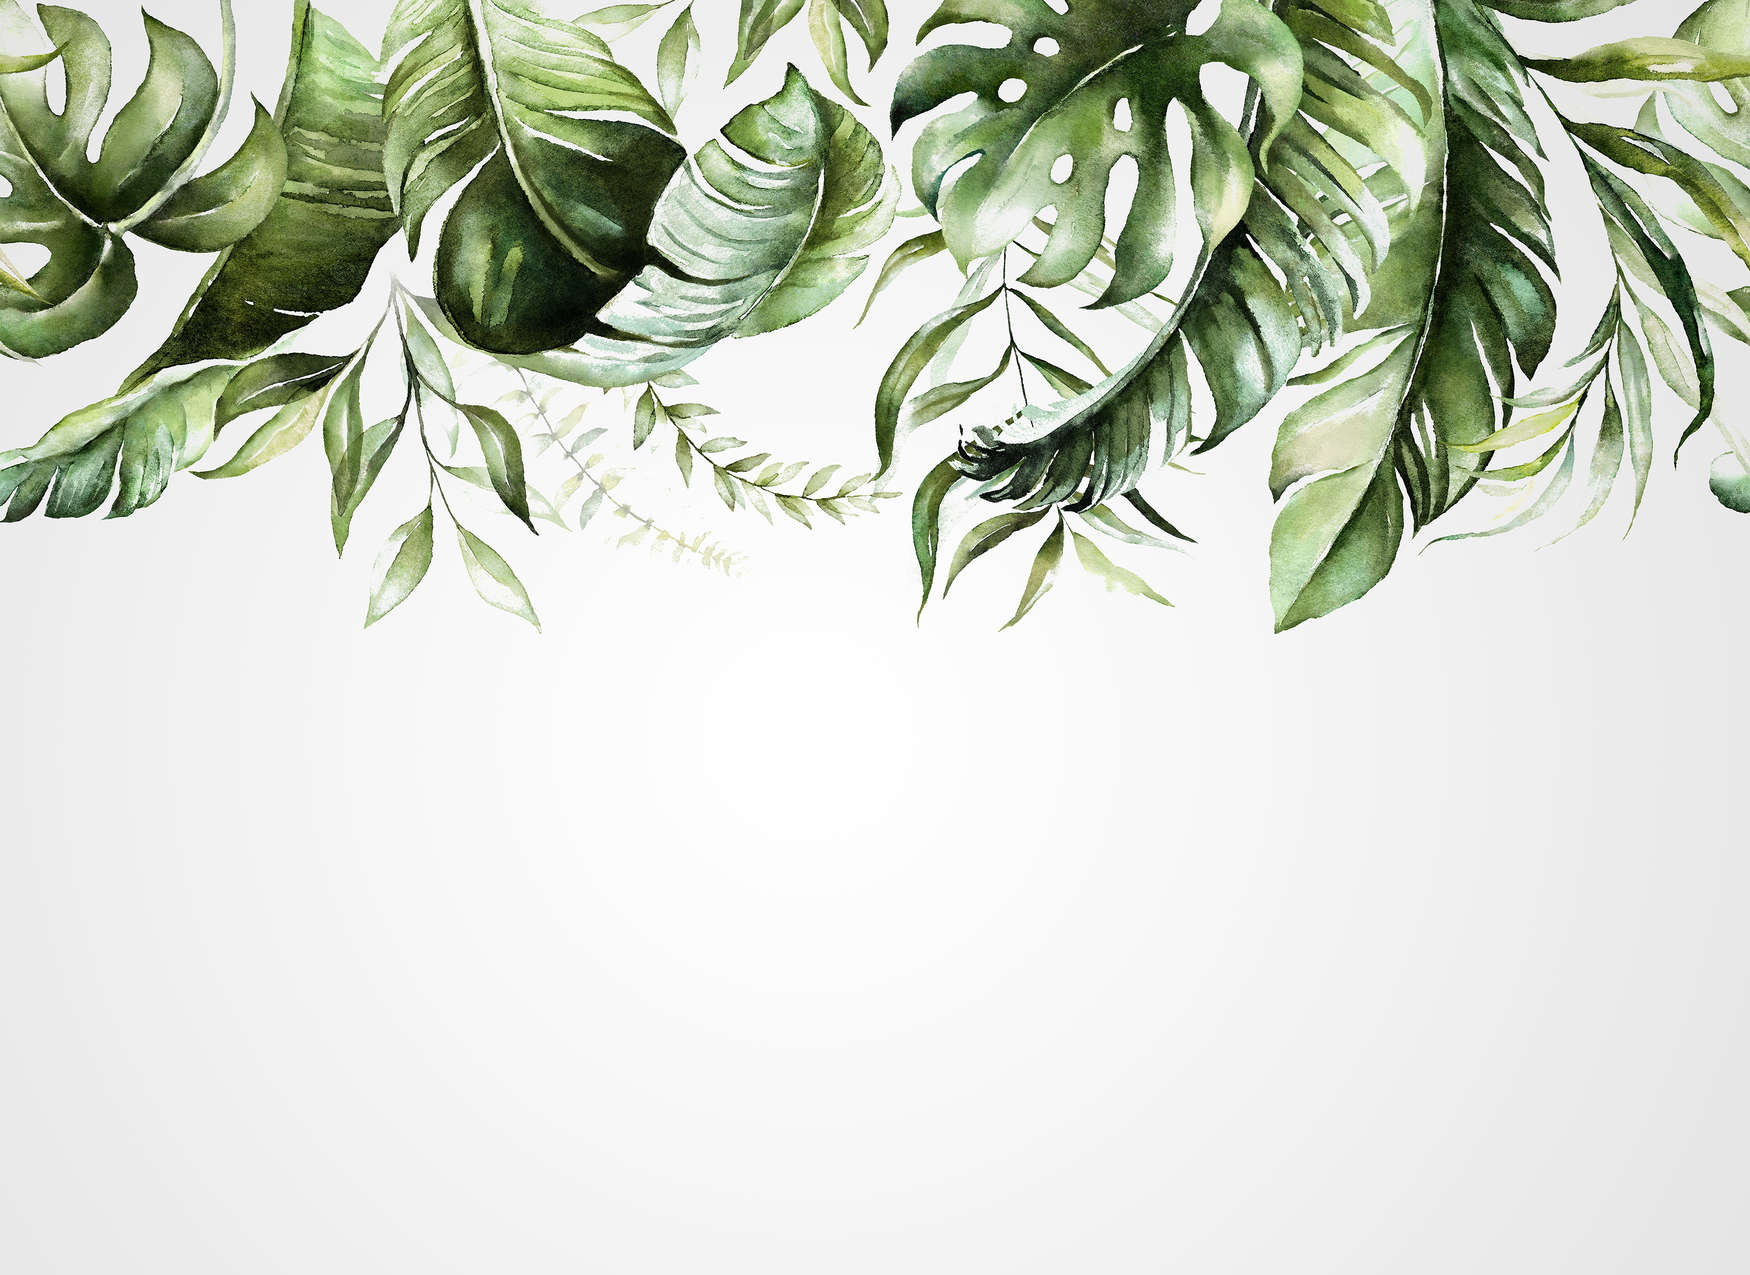             Photo wallpaper with tropical leaf tendrils on a wall - Green, White
        